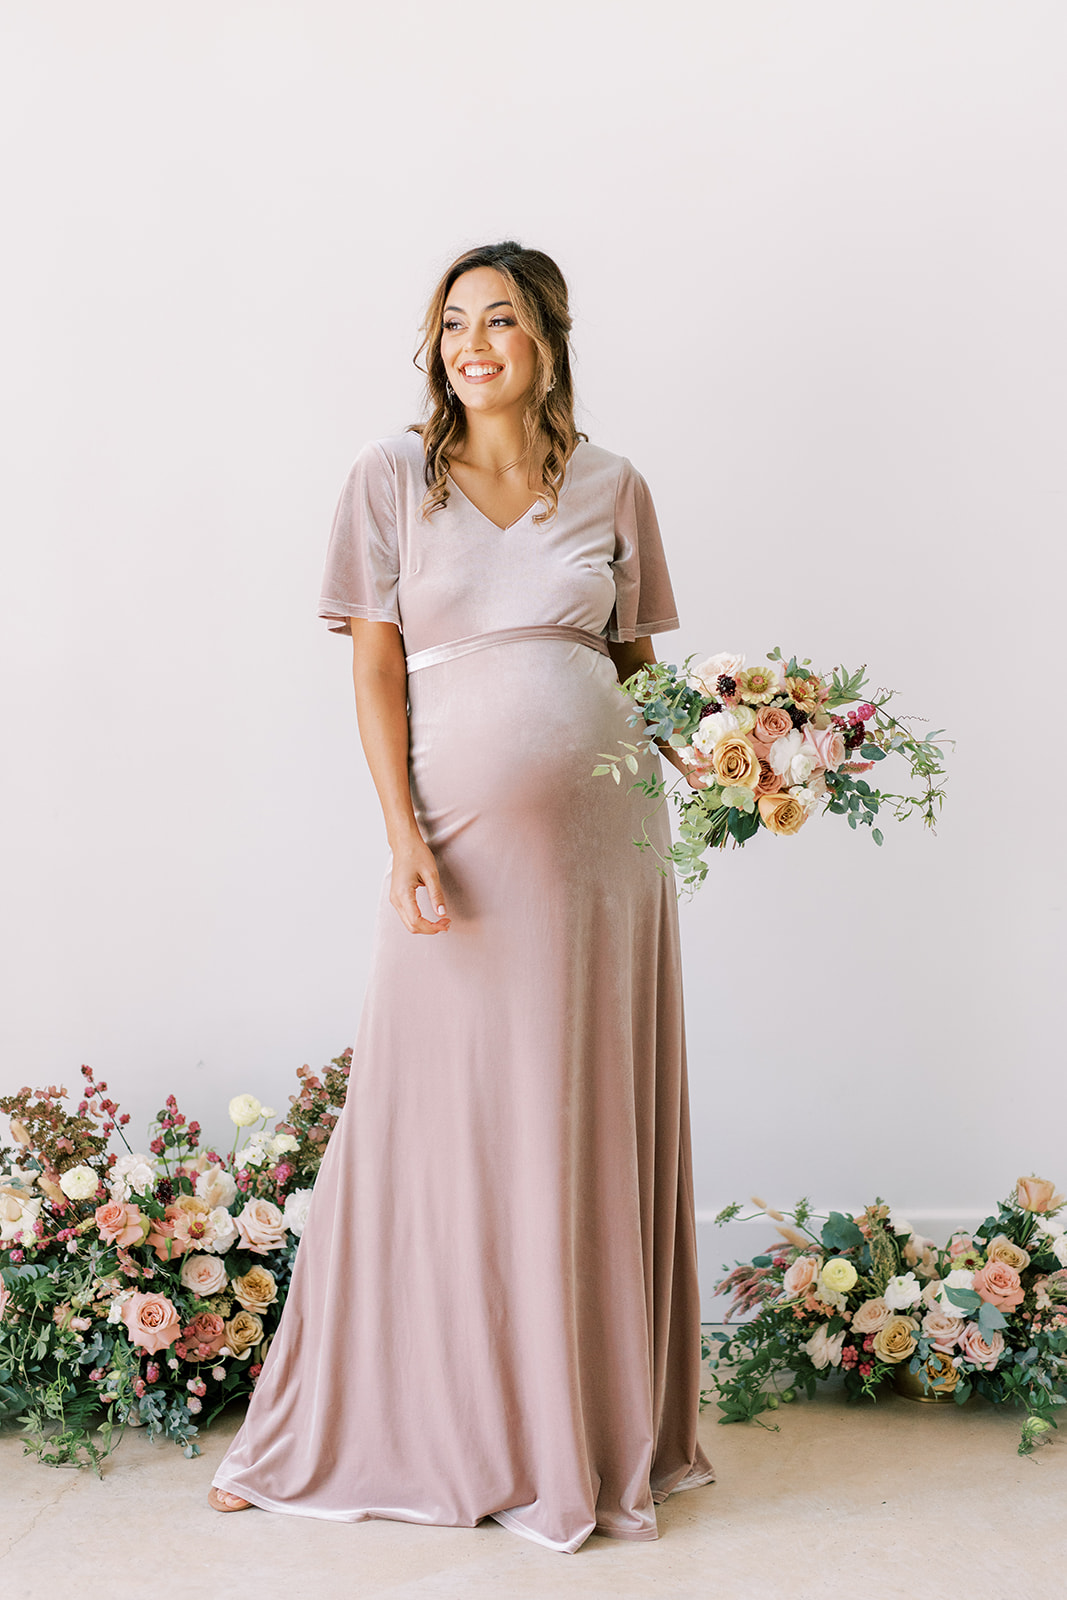 Maternity Gowns for the Mommy-to-be